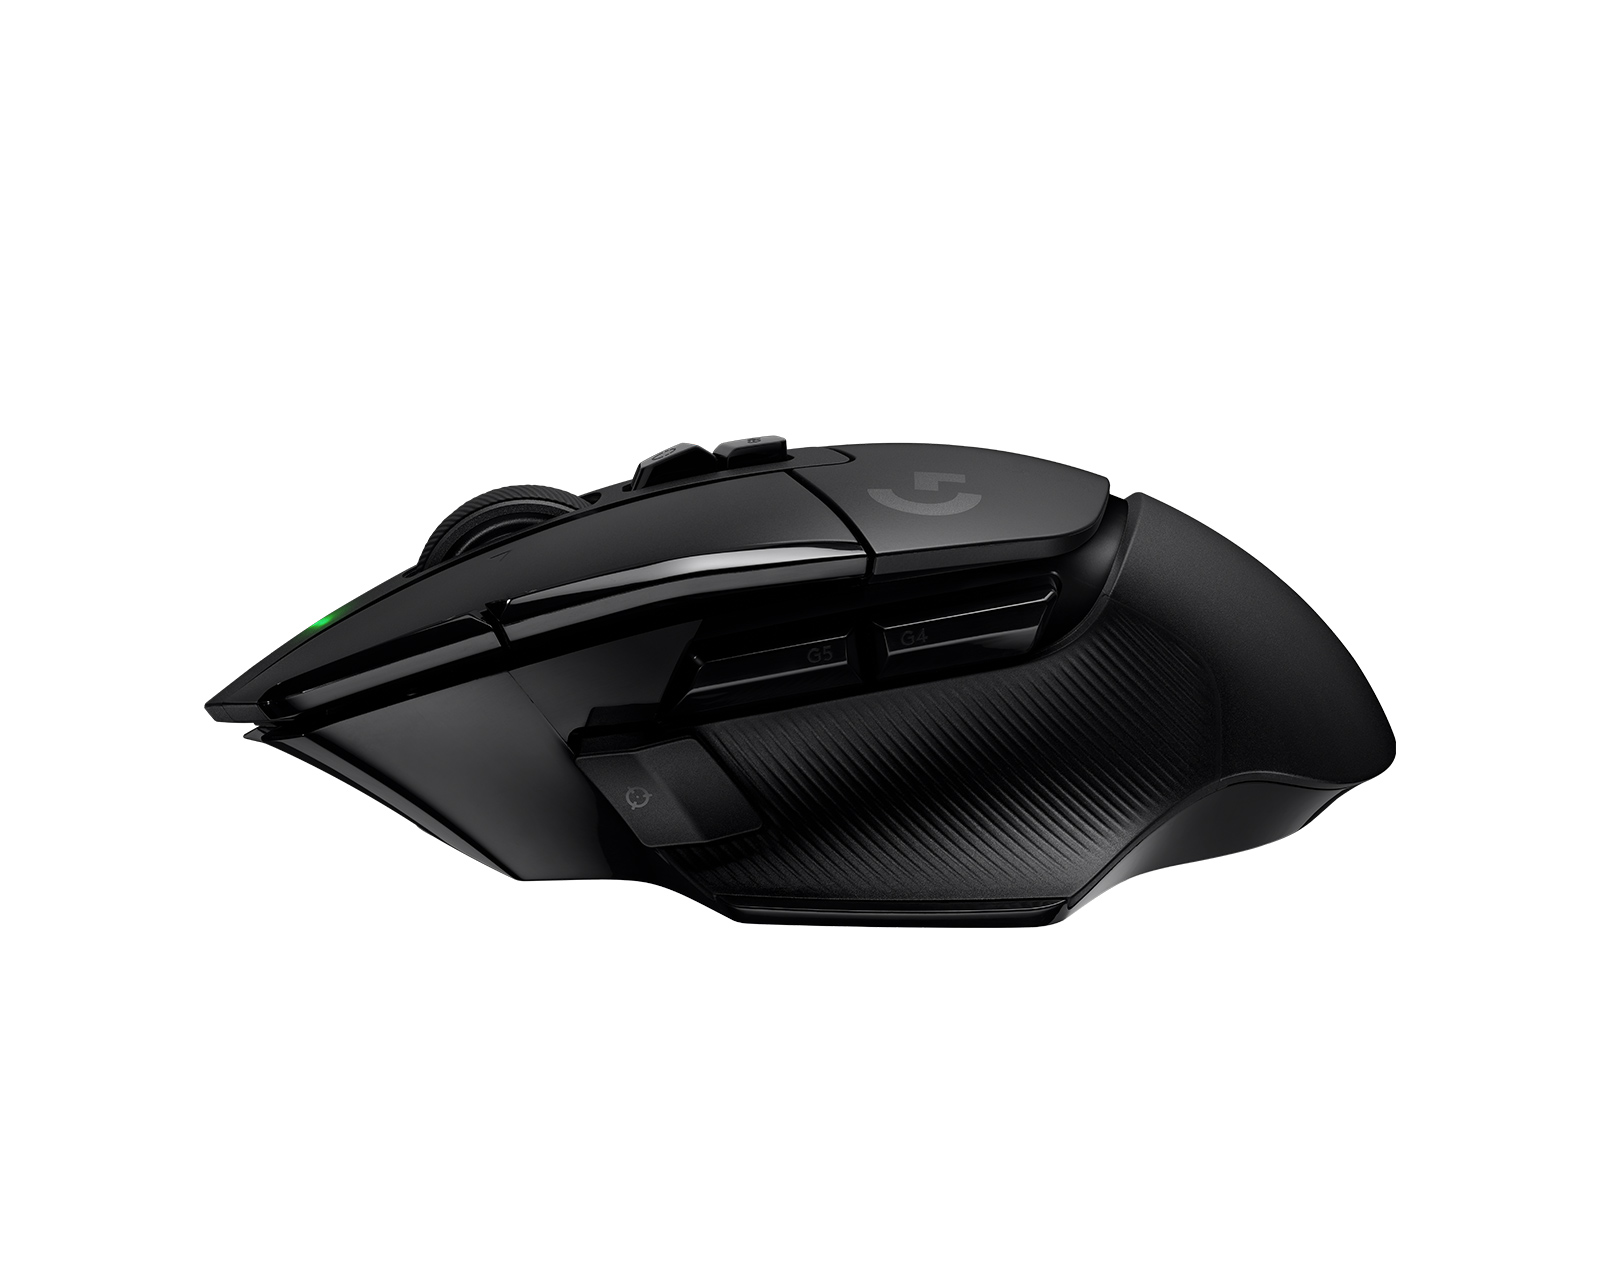 Logitech G502 X, G502 X Lightspeed and G502 X Plus Gaming Mice launched in  India